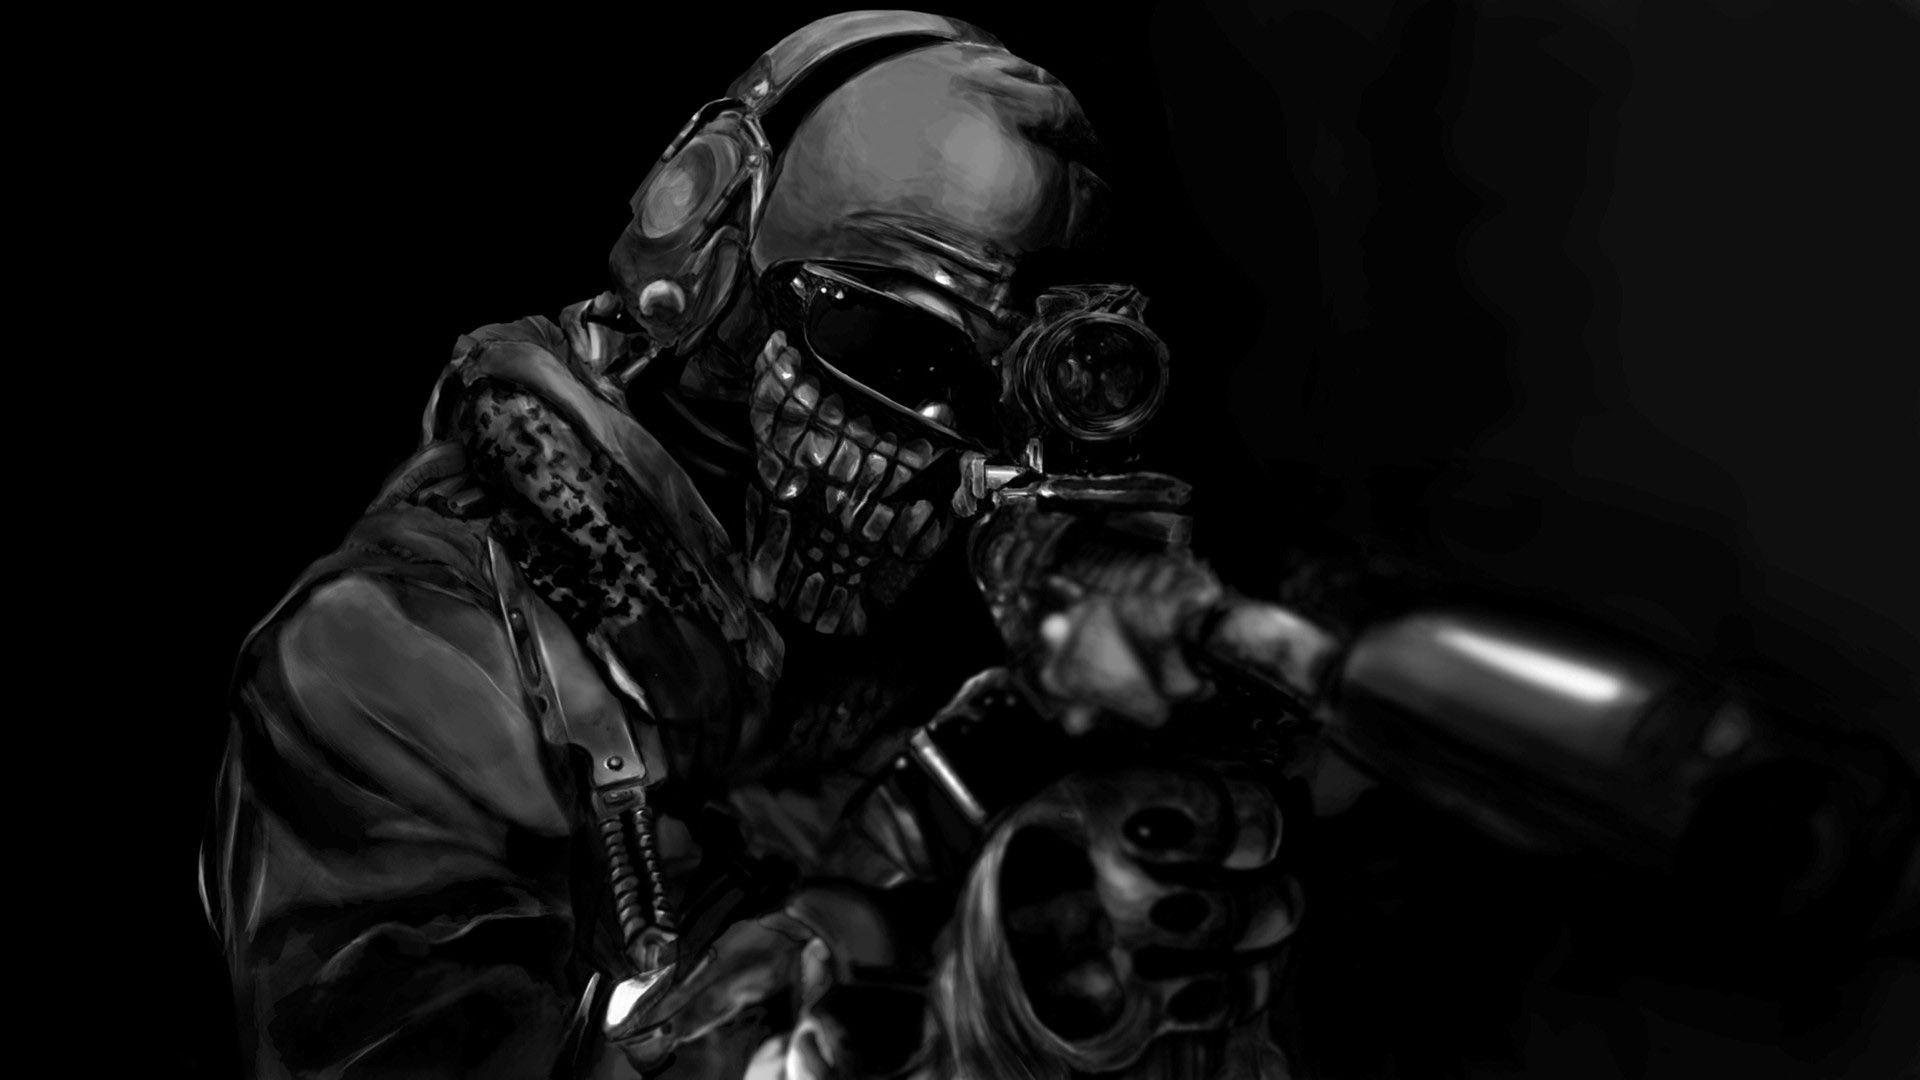 Download Call of Duty Ghosts Wallpaper 1920x1080 in HD Call of Duty